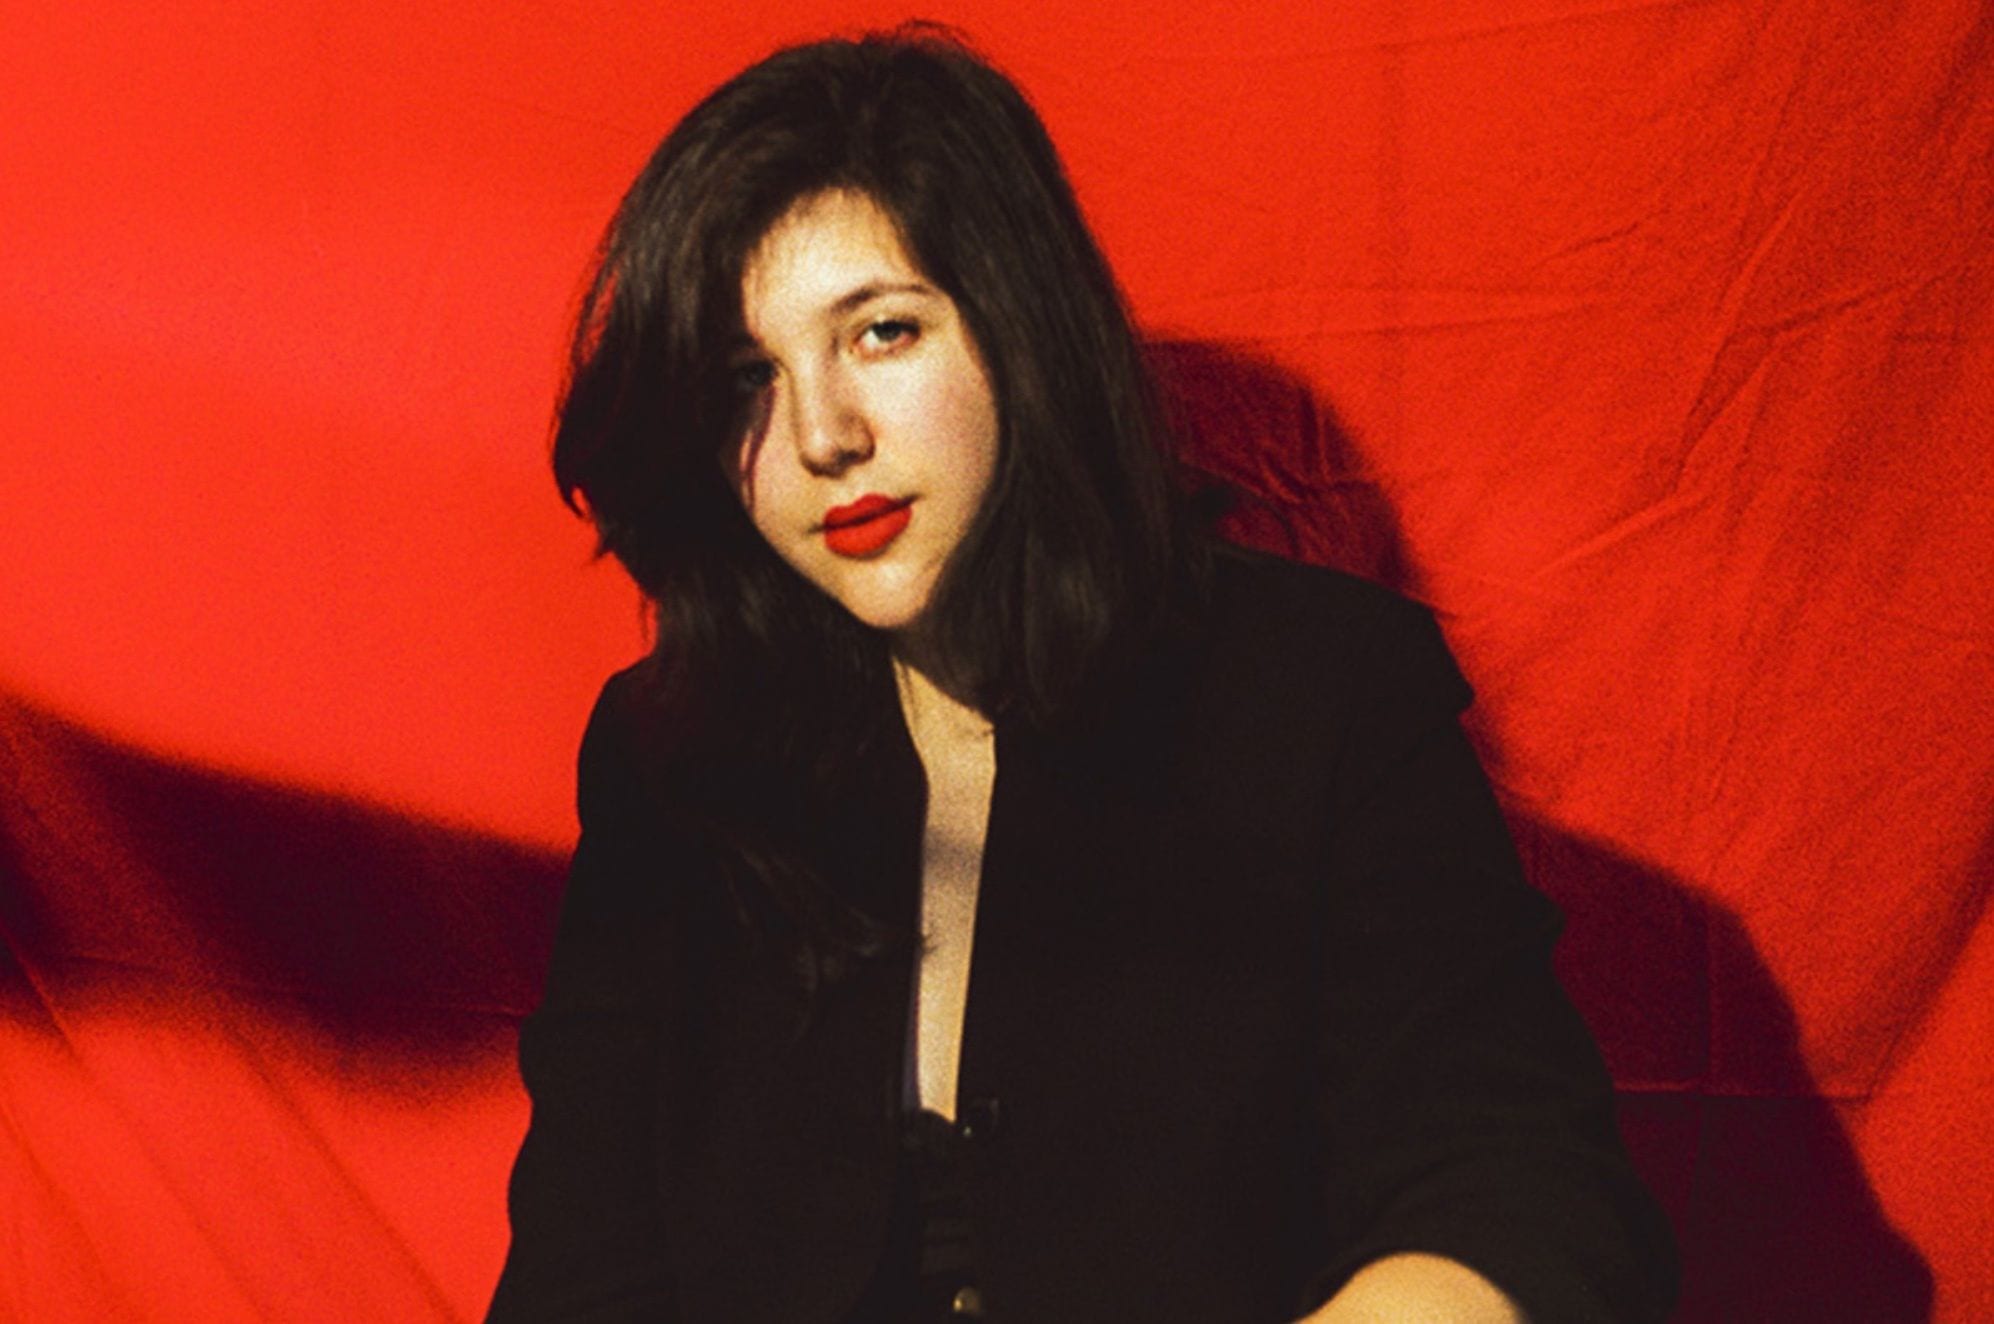 Change and Continuity: An Interview With Lucy Dacus